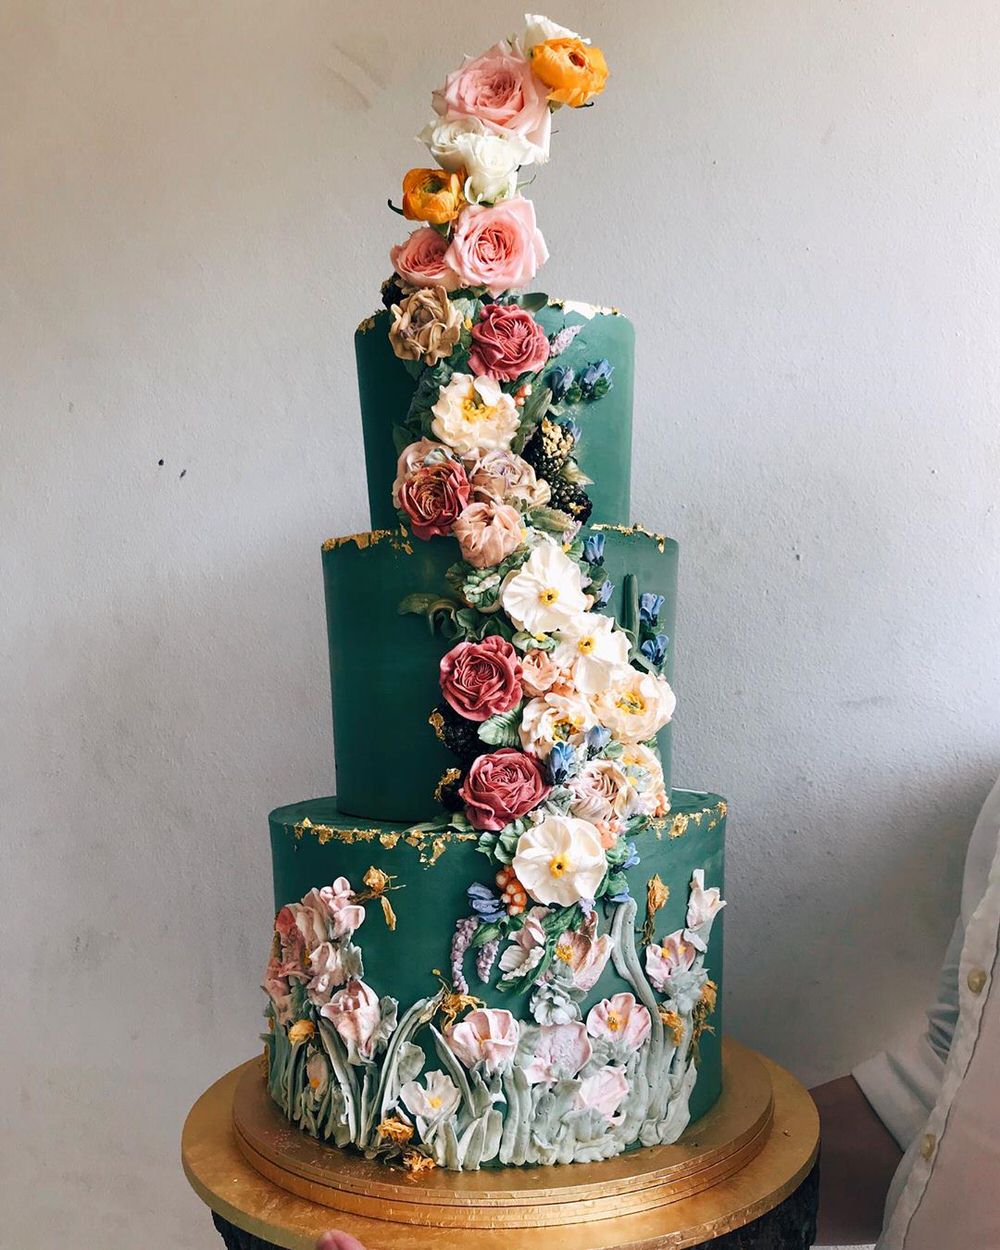 3 tier buttercream floral wedding cake - how to dowel, stack, decorate &  pipe 5 petal flowers - YouTube